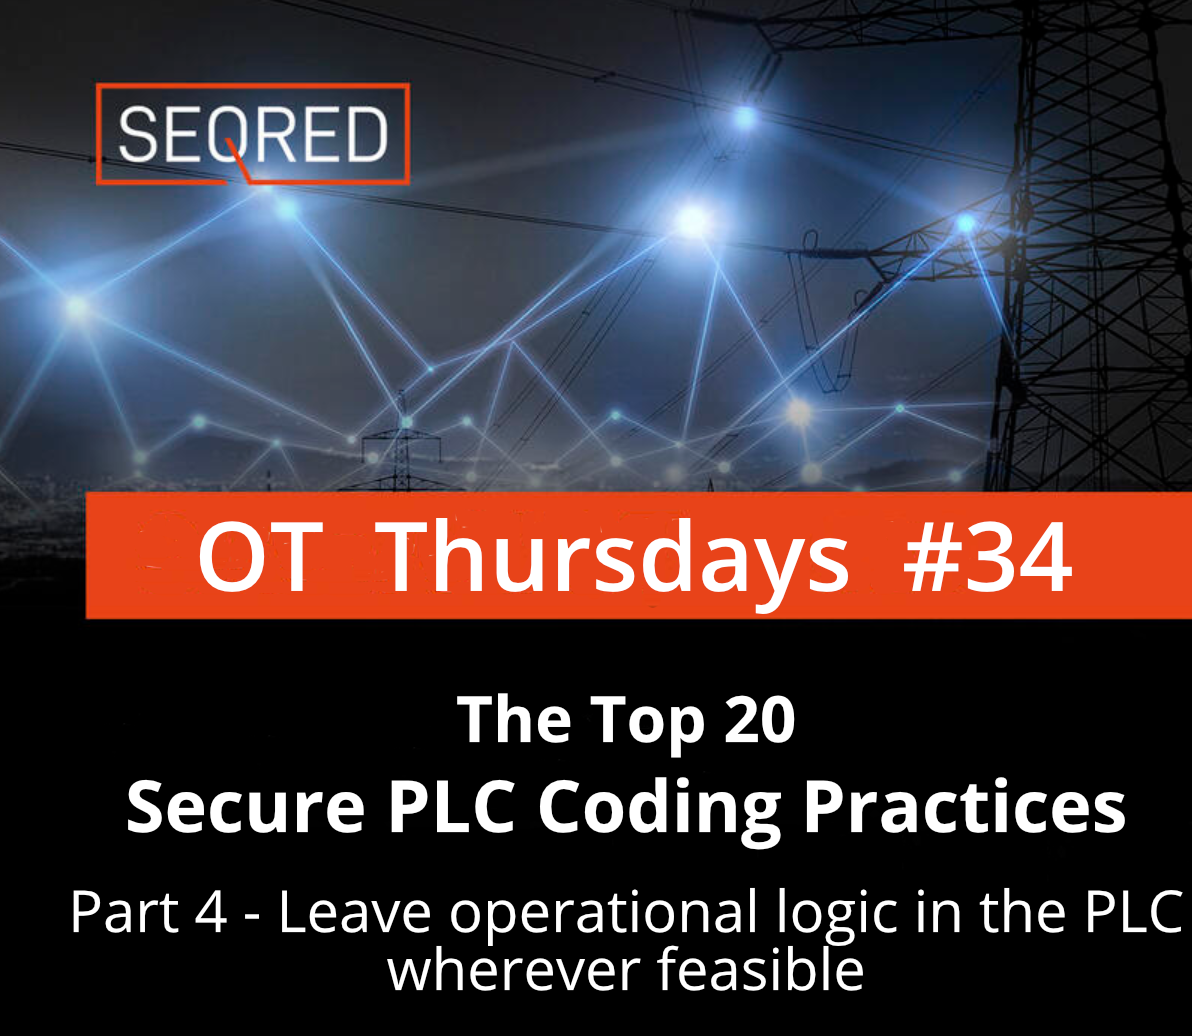 The Top 20 Secure PLC Coding Practices. Part 4 - Leave operational logic in the PLC wherever feasible